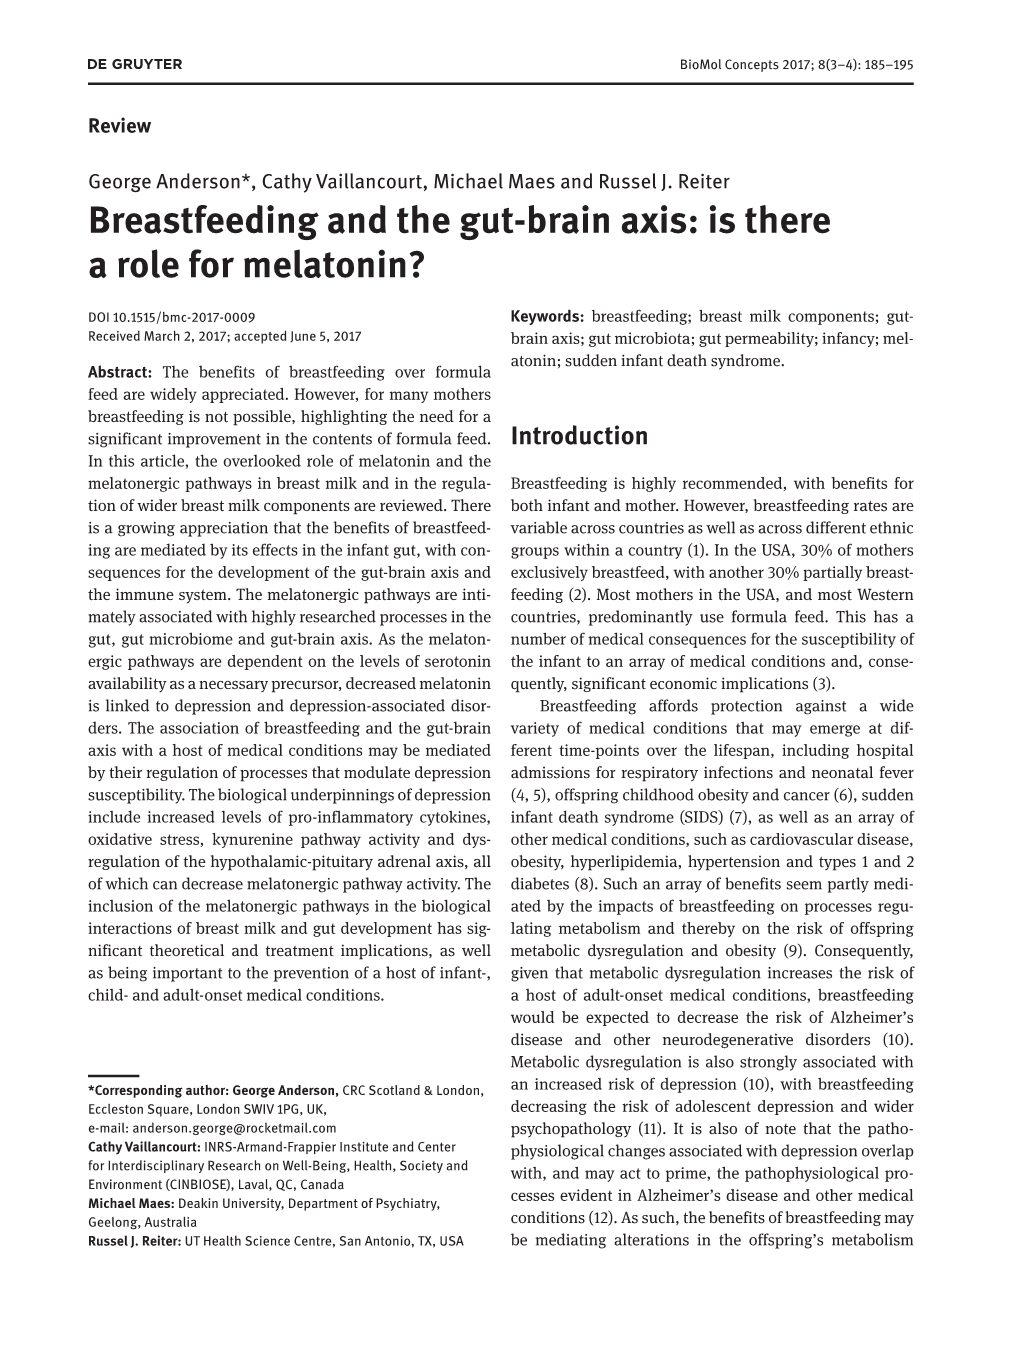 Breastfeeding and the Gut-Brain Axis: Is There a Role for Melatonin?